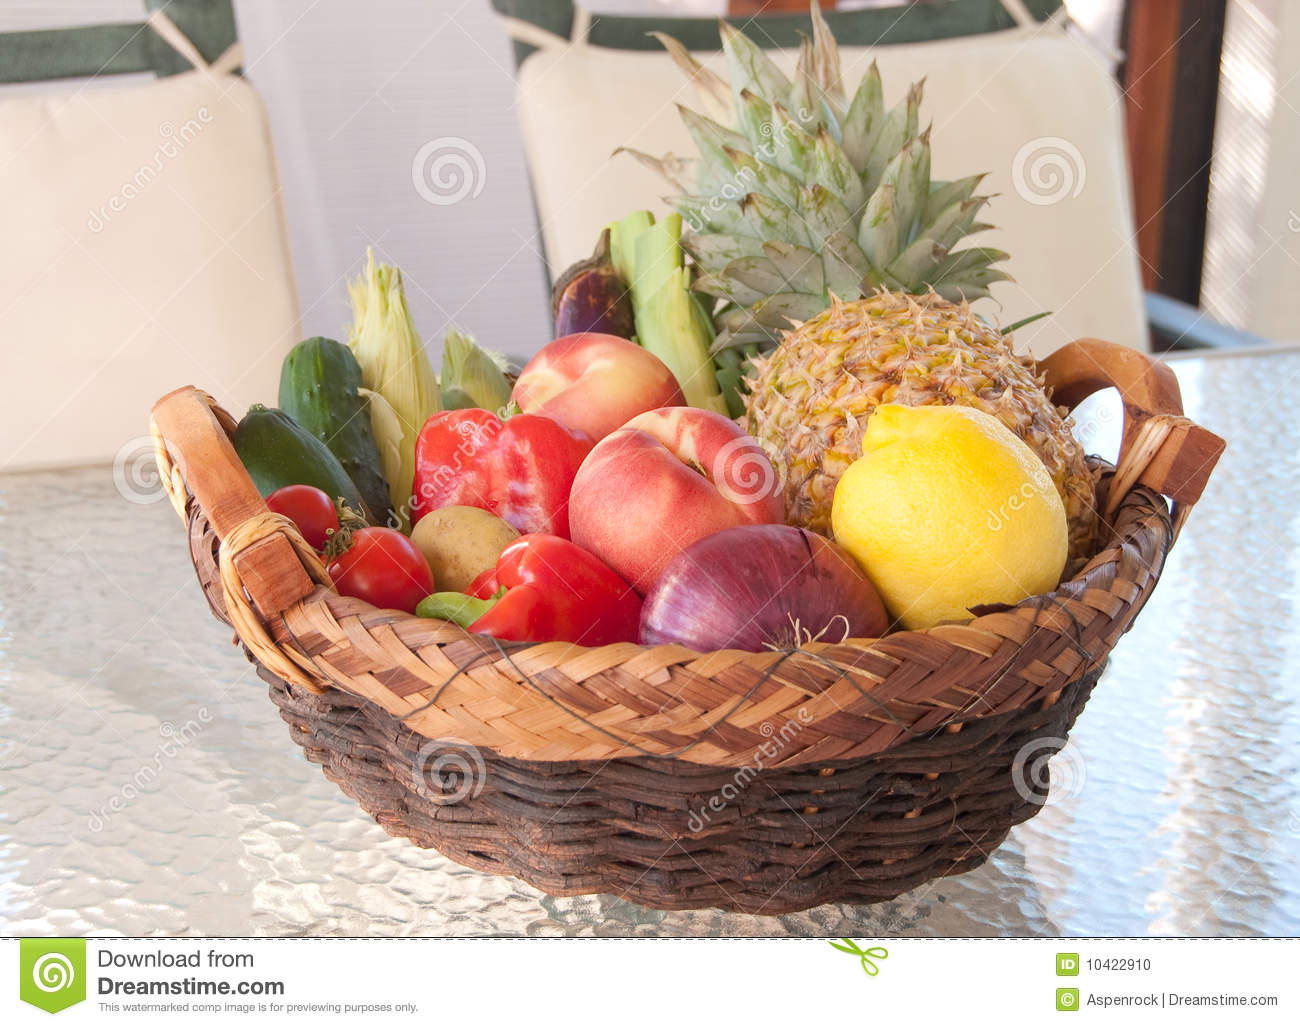 Fresh Summer Fruits And Vegetables Stock Photo   Image  10422910